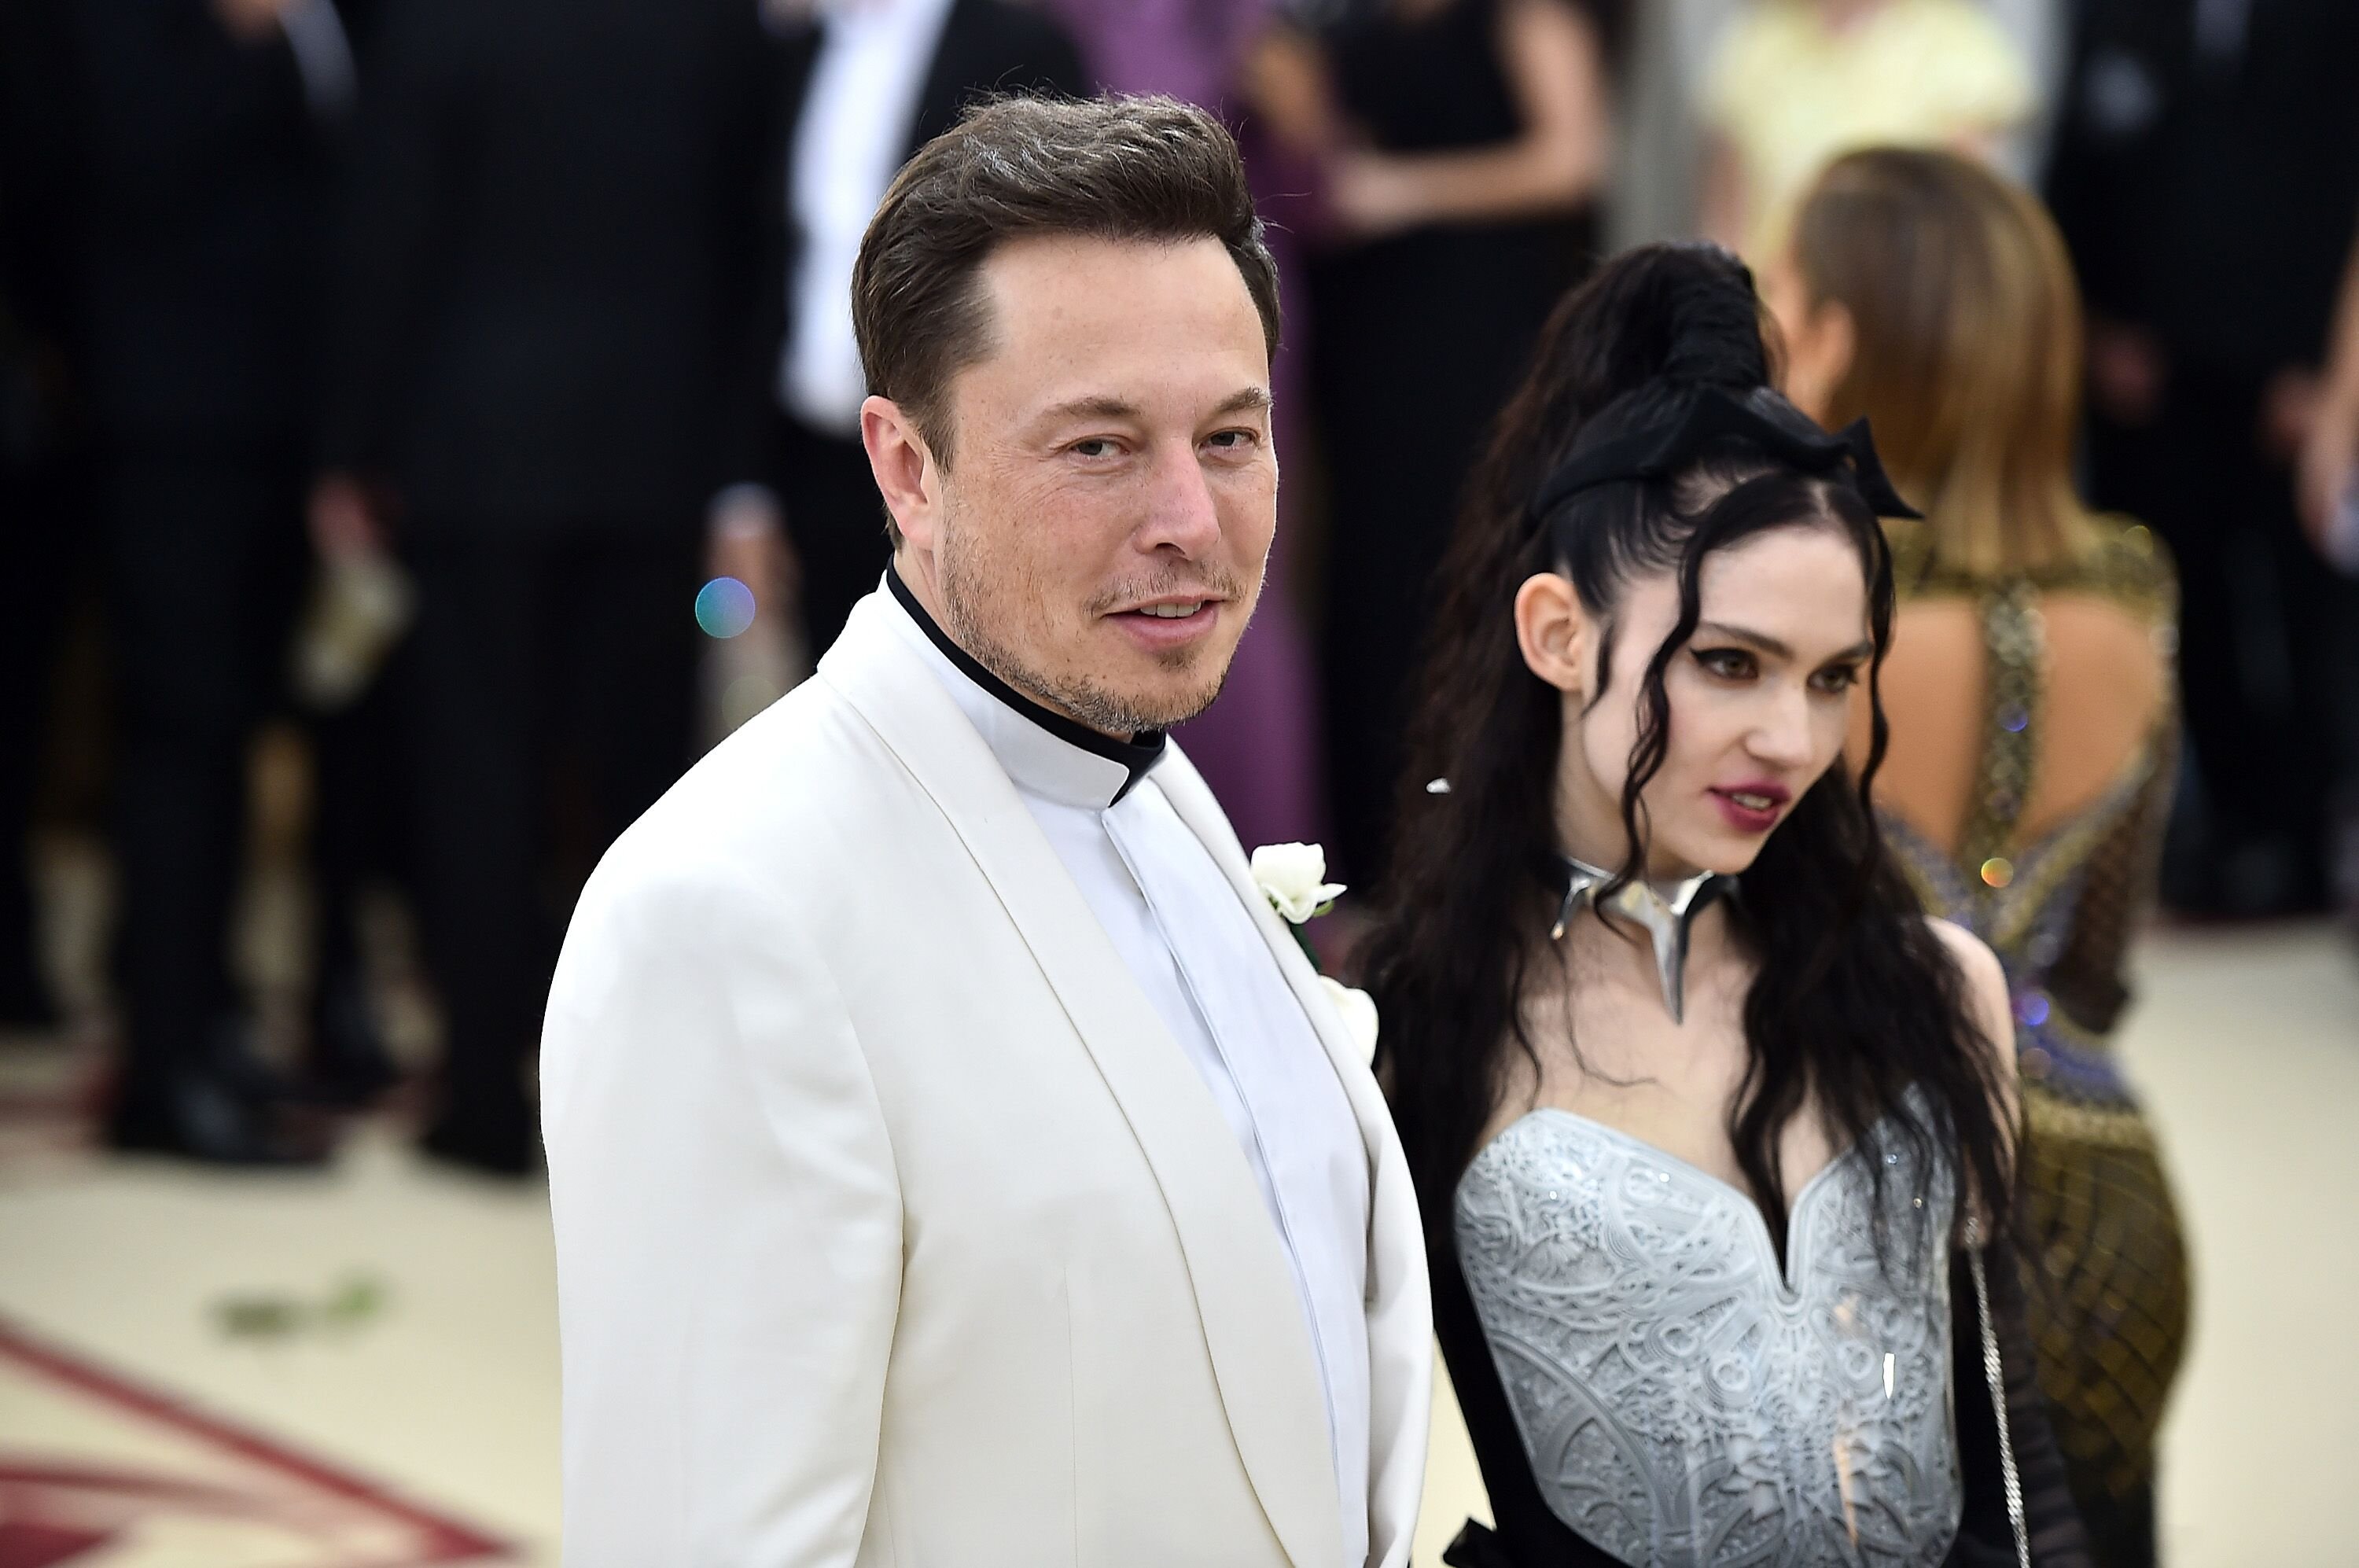 Elon Musk and Grimes attend the MET Gala on May 7, 2018 in New York City | Photo: Getty Images